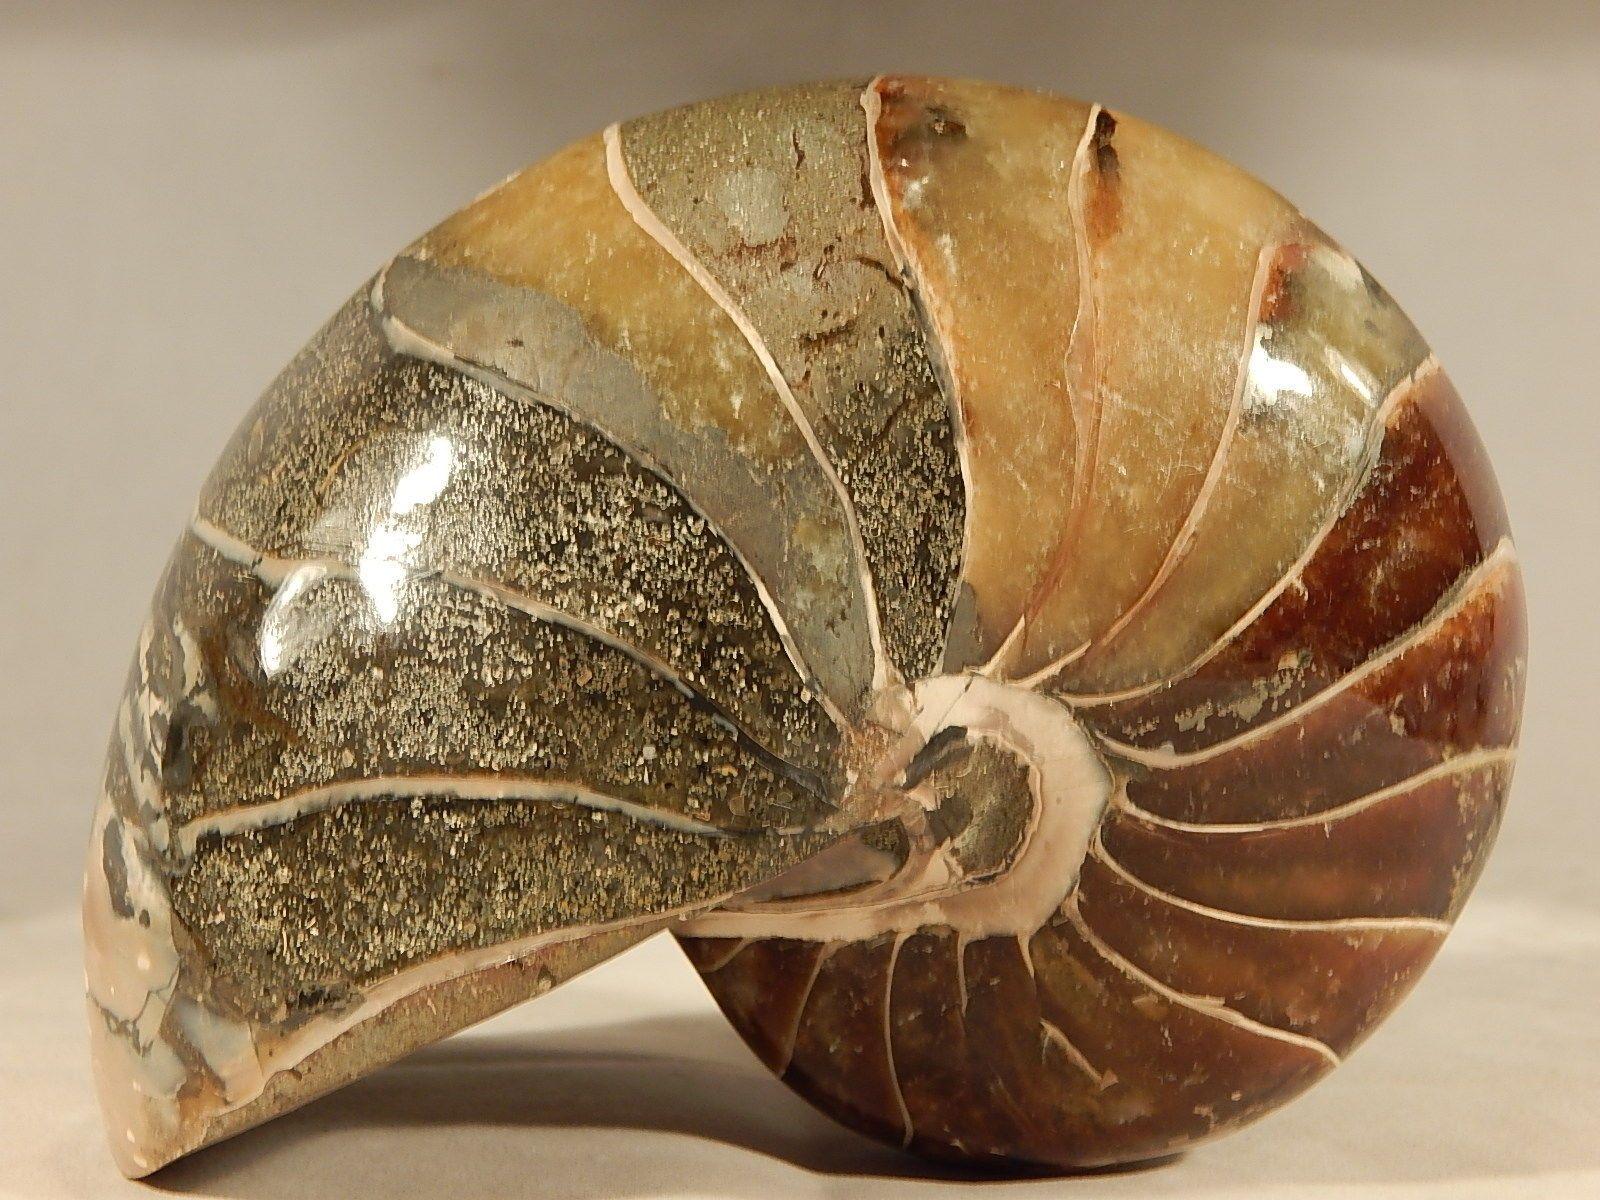 Details about LARGE Nautilus Fossil Nautiloid Fish Mineral